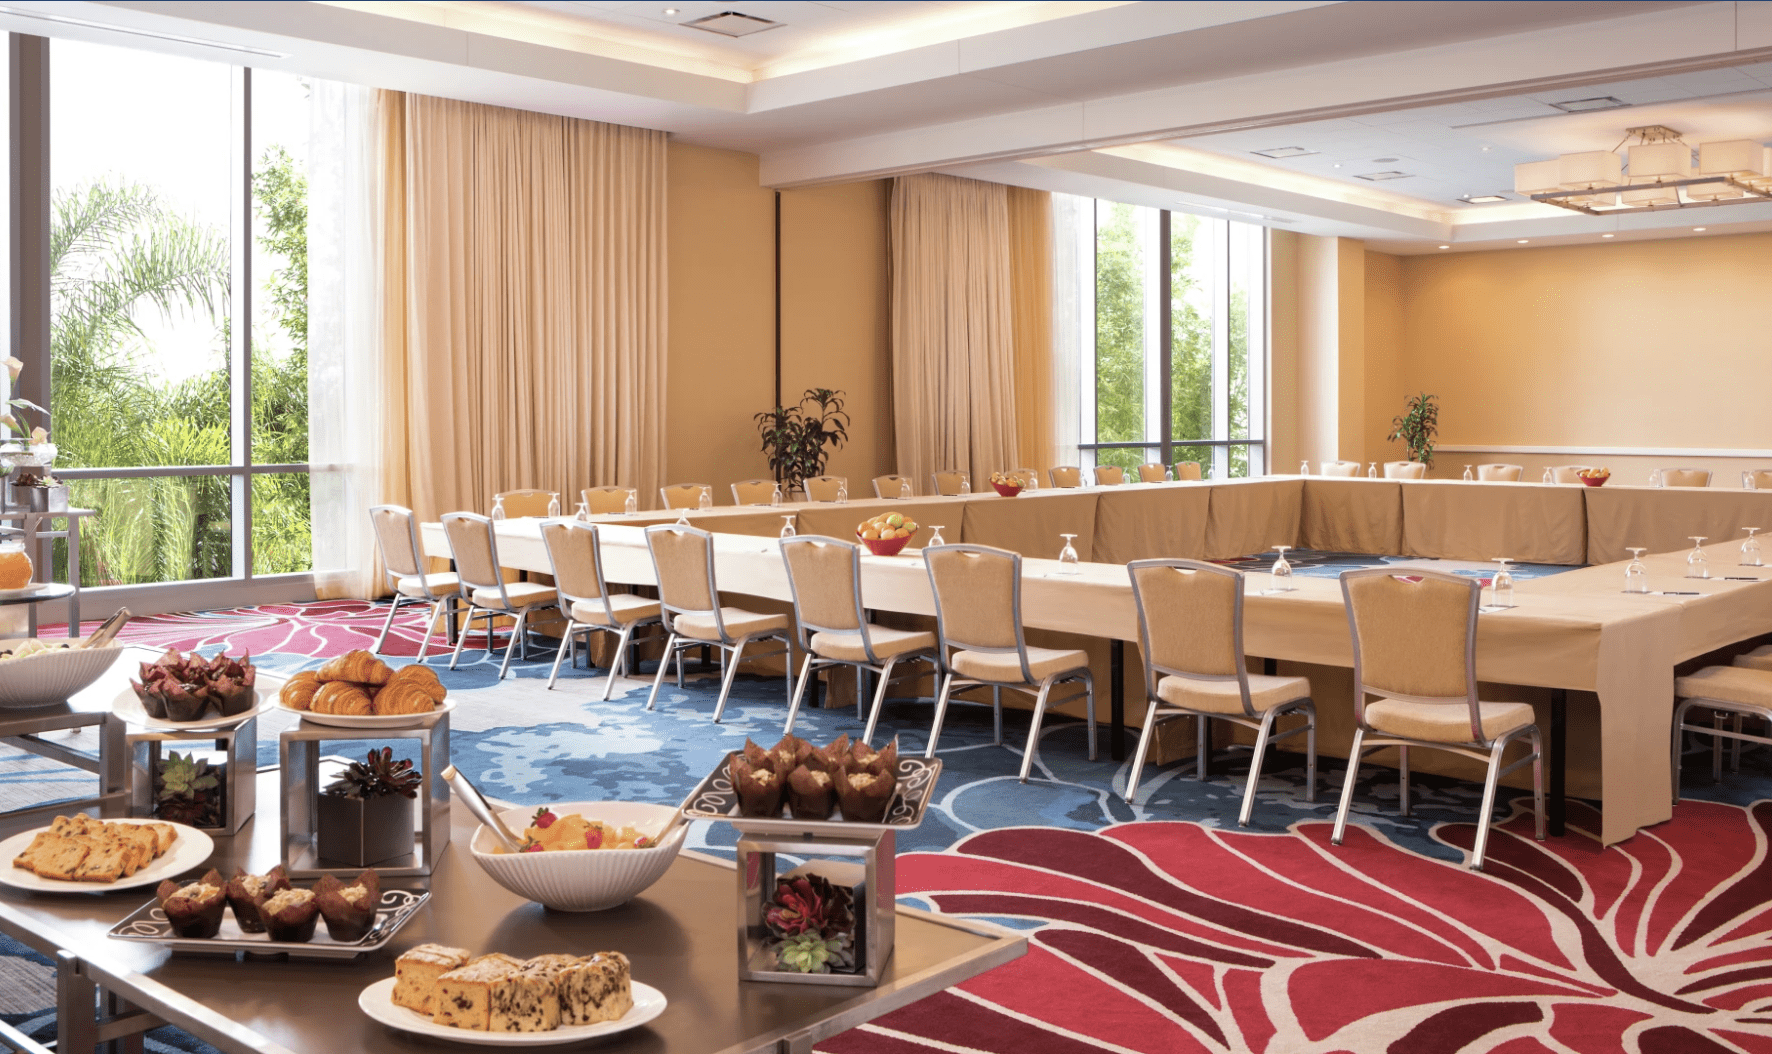 A meeting room in Hilton Orlando with a large square table and catering table. For fun retreats, their hotel-sized escape room is worth trying.